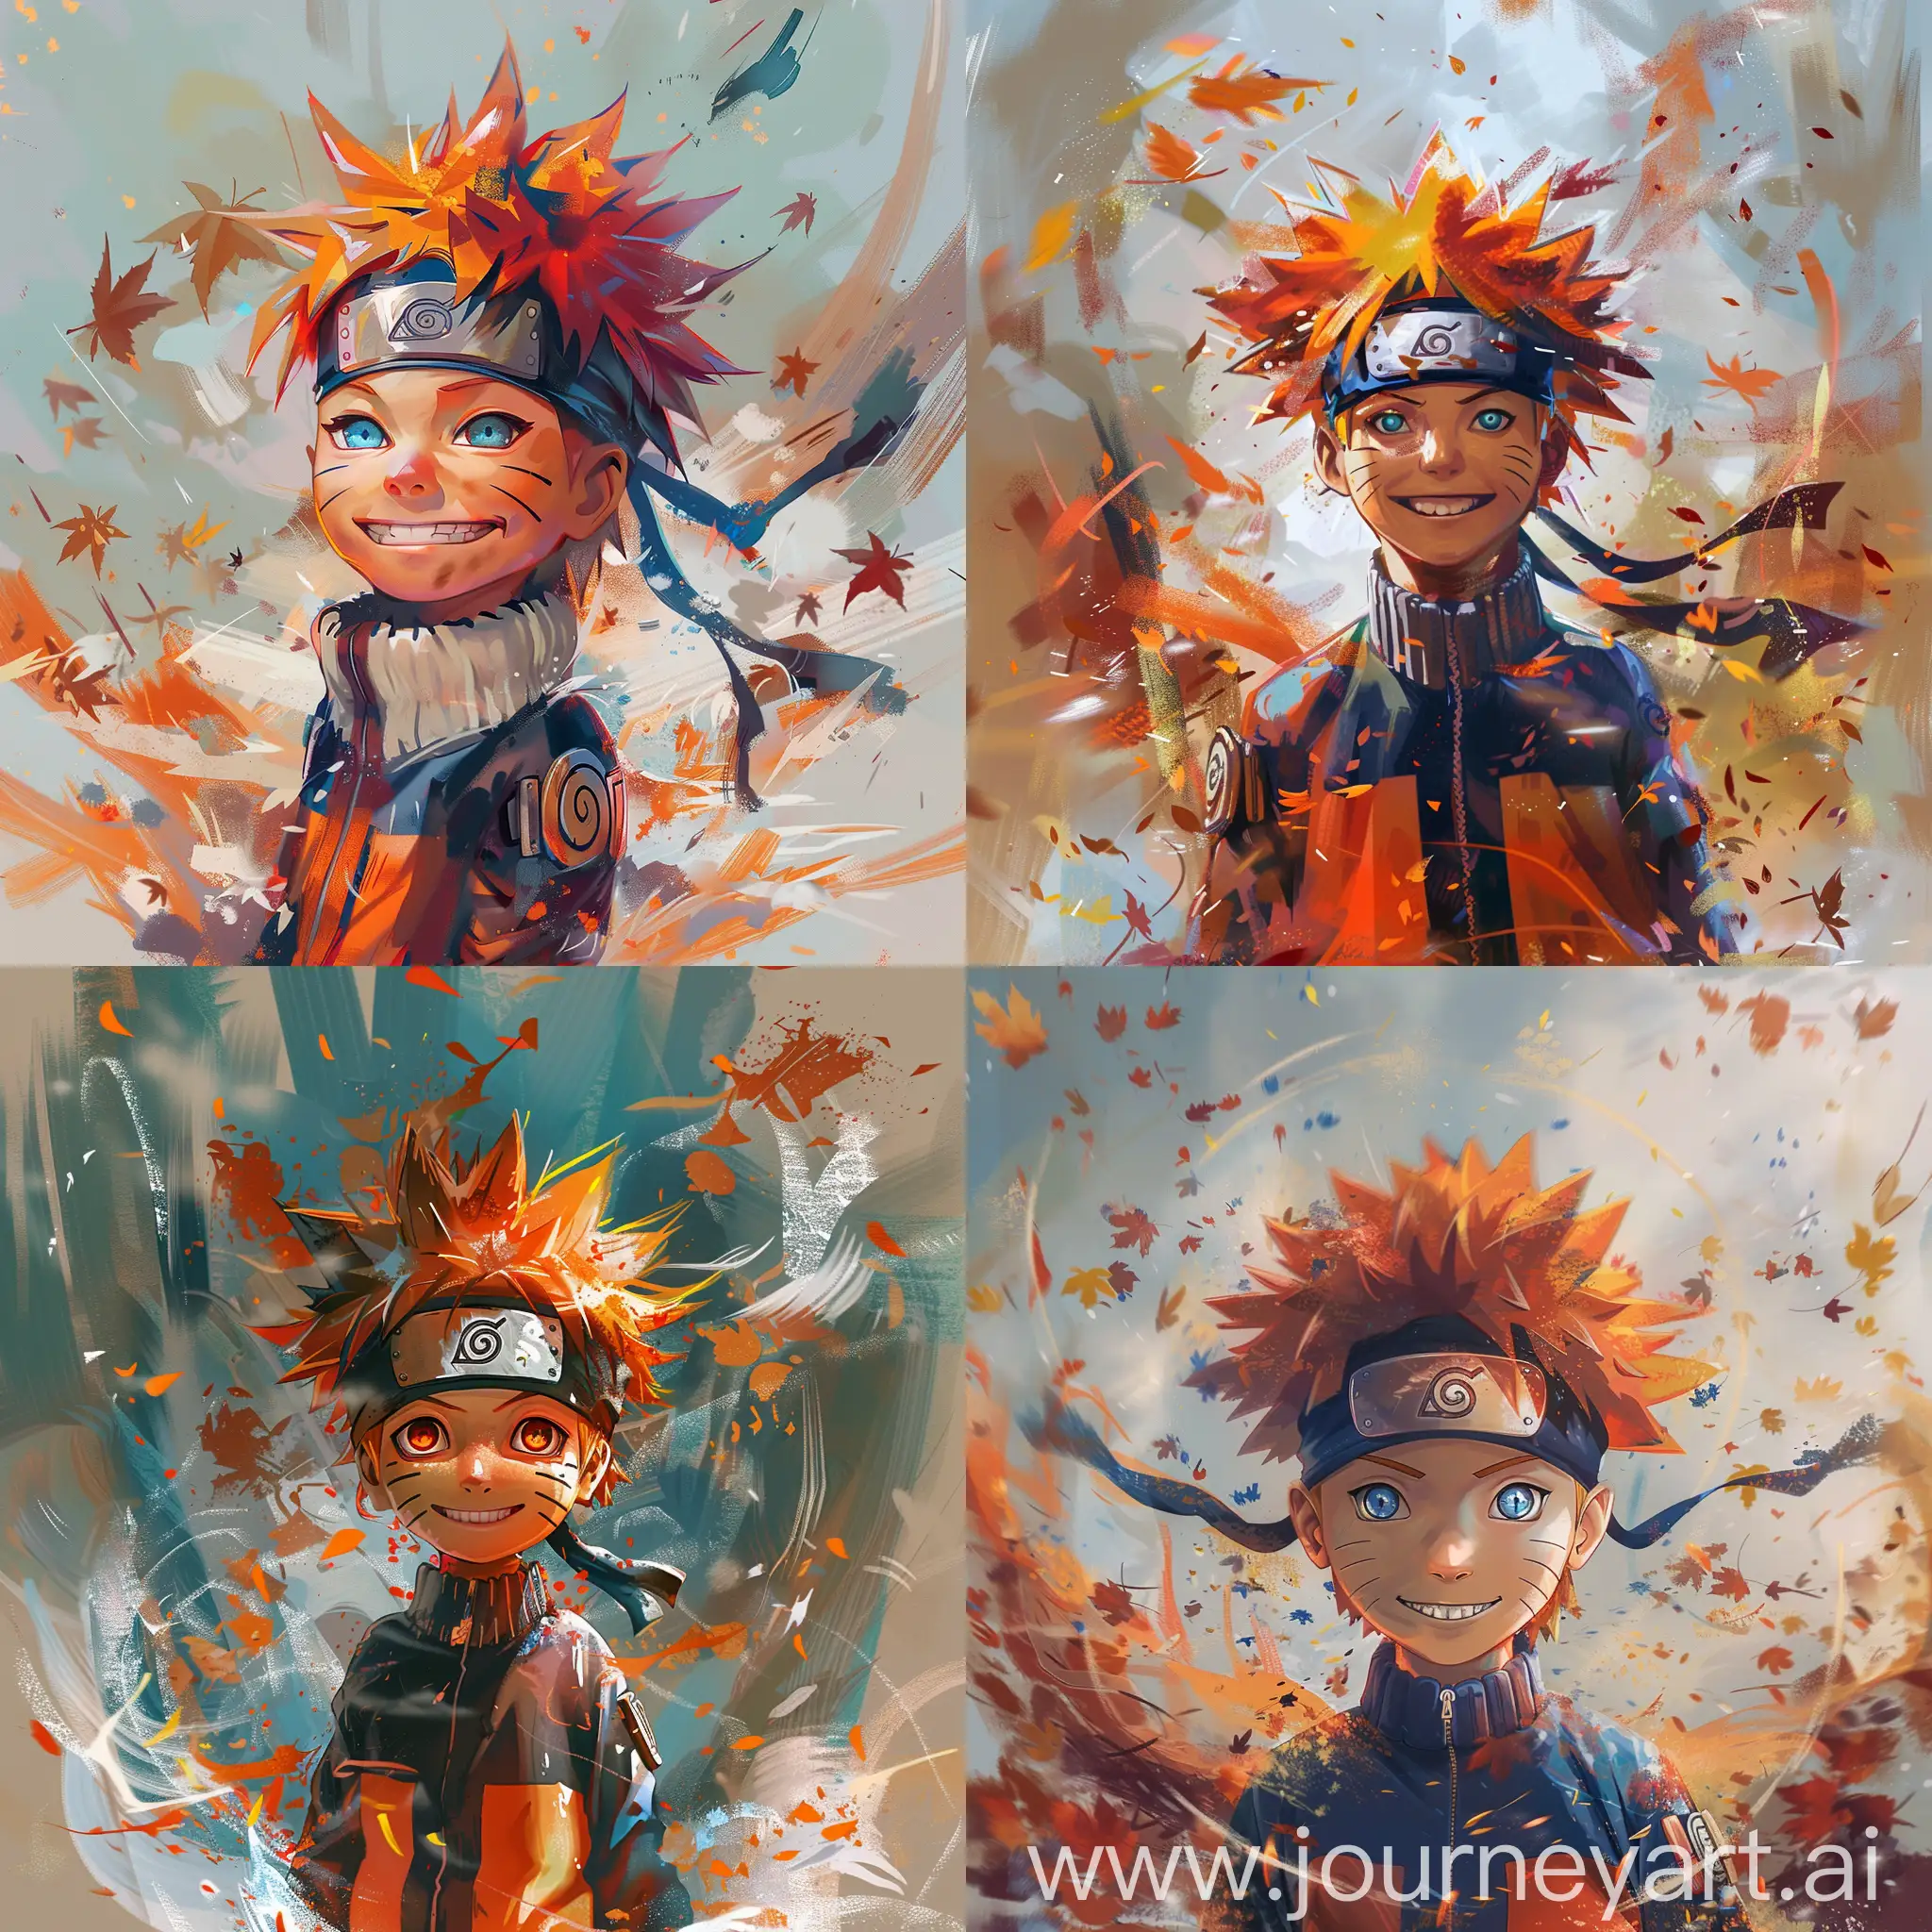 naruto is the essence of a spirited and adventurous youth. This character has wild, spiky hair the color of the midday sun, and eyes like clear skies, full of life and curiosity. They're dressed in an attire that mixes traditional and modern ninja garb, with a color palette that includes vibrant oranges and deep blues, symbolizing both energy and steadfastness. They wear a simple headband adorned with a symbol that speaks of their connection to their village—a place of camaraderie and growth. The character stands with a confident grin, a stance that's relaxed yet ready for any challenge. The background is a blur of movement, with splashes of color and stylized motifs that suggest a whirlwind of leaves, evoking a sense of motion and vitality. The entire composition should breathe with the character's indomitable spirit, capturing the blend of anime aesthetics and semi-realistic digital art, highlighting the textures and light play that give the scene its depth and allure.